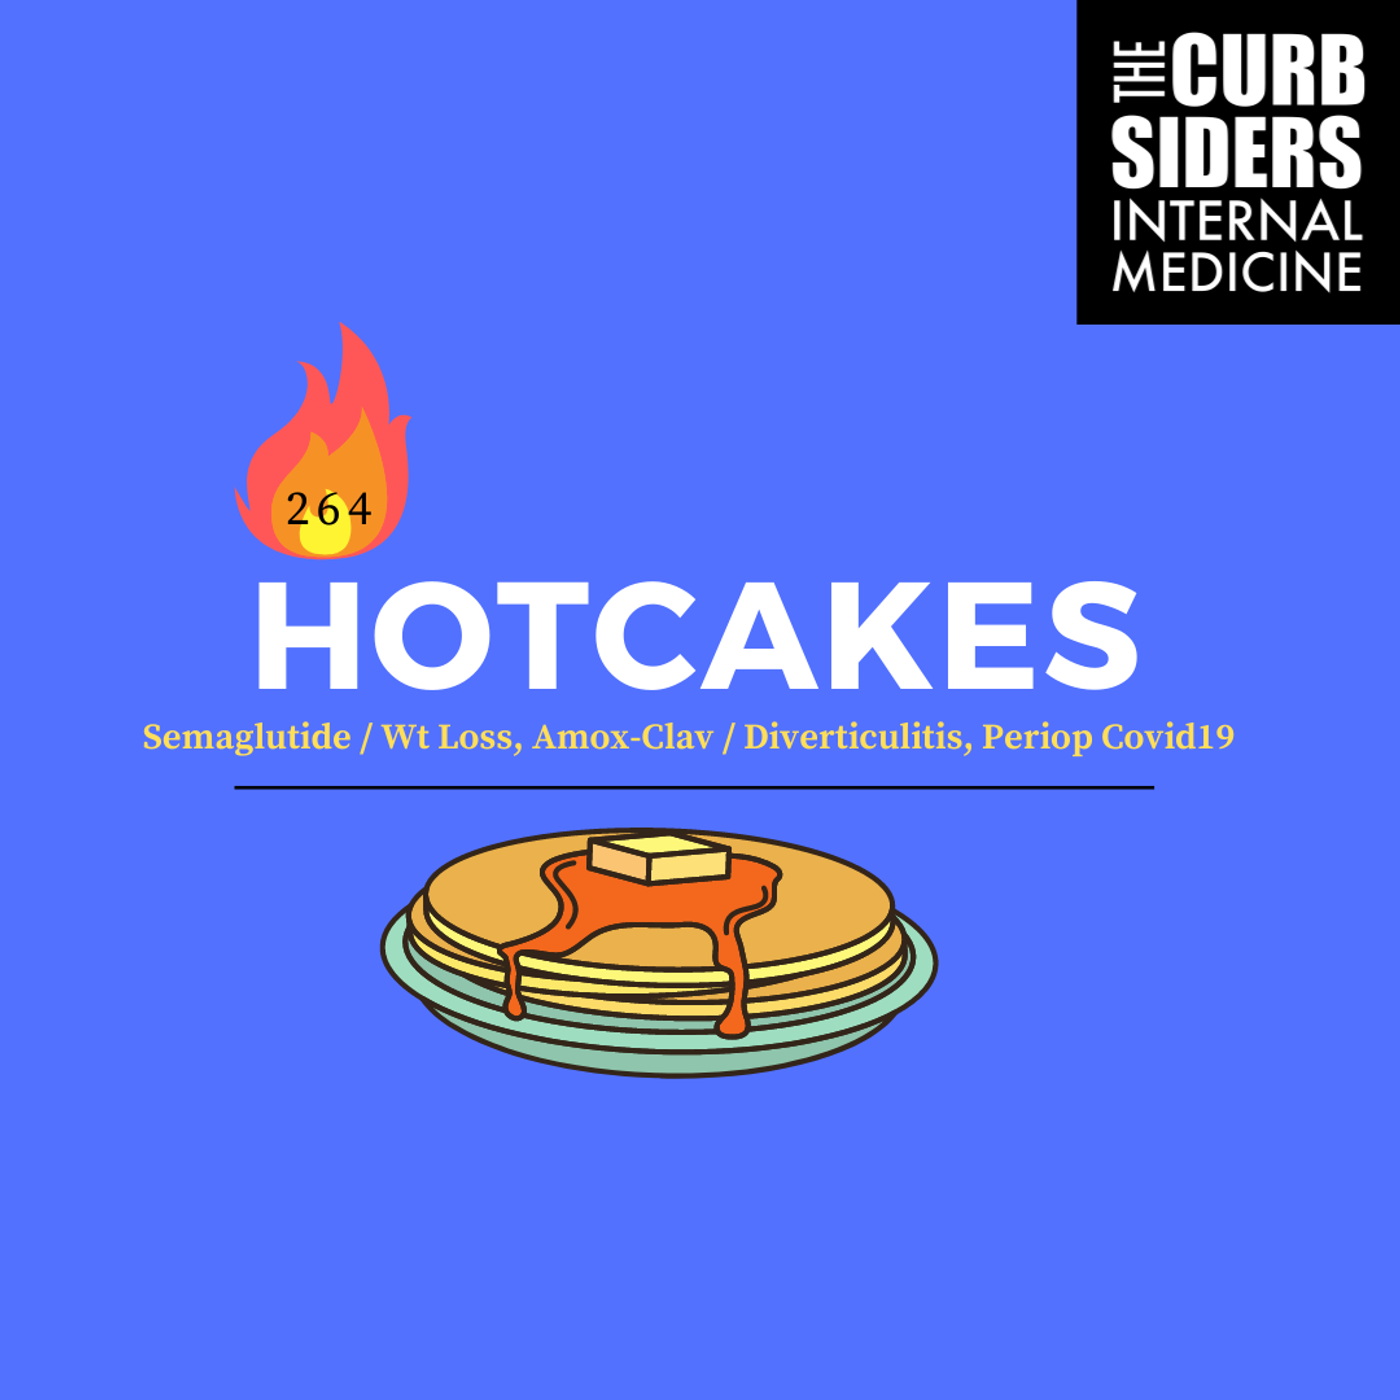 #264 Hotcakes: Semaglutide for Weight Loss, Abx for Diverticulitis, Periop COVID19